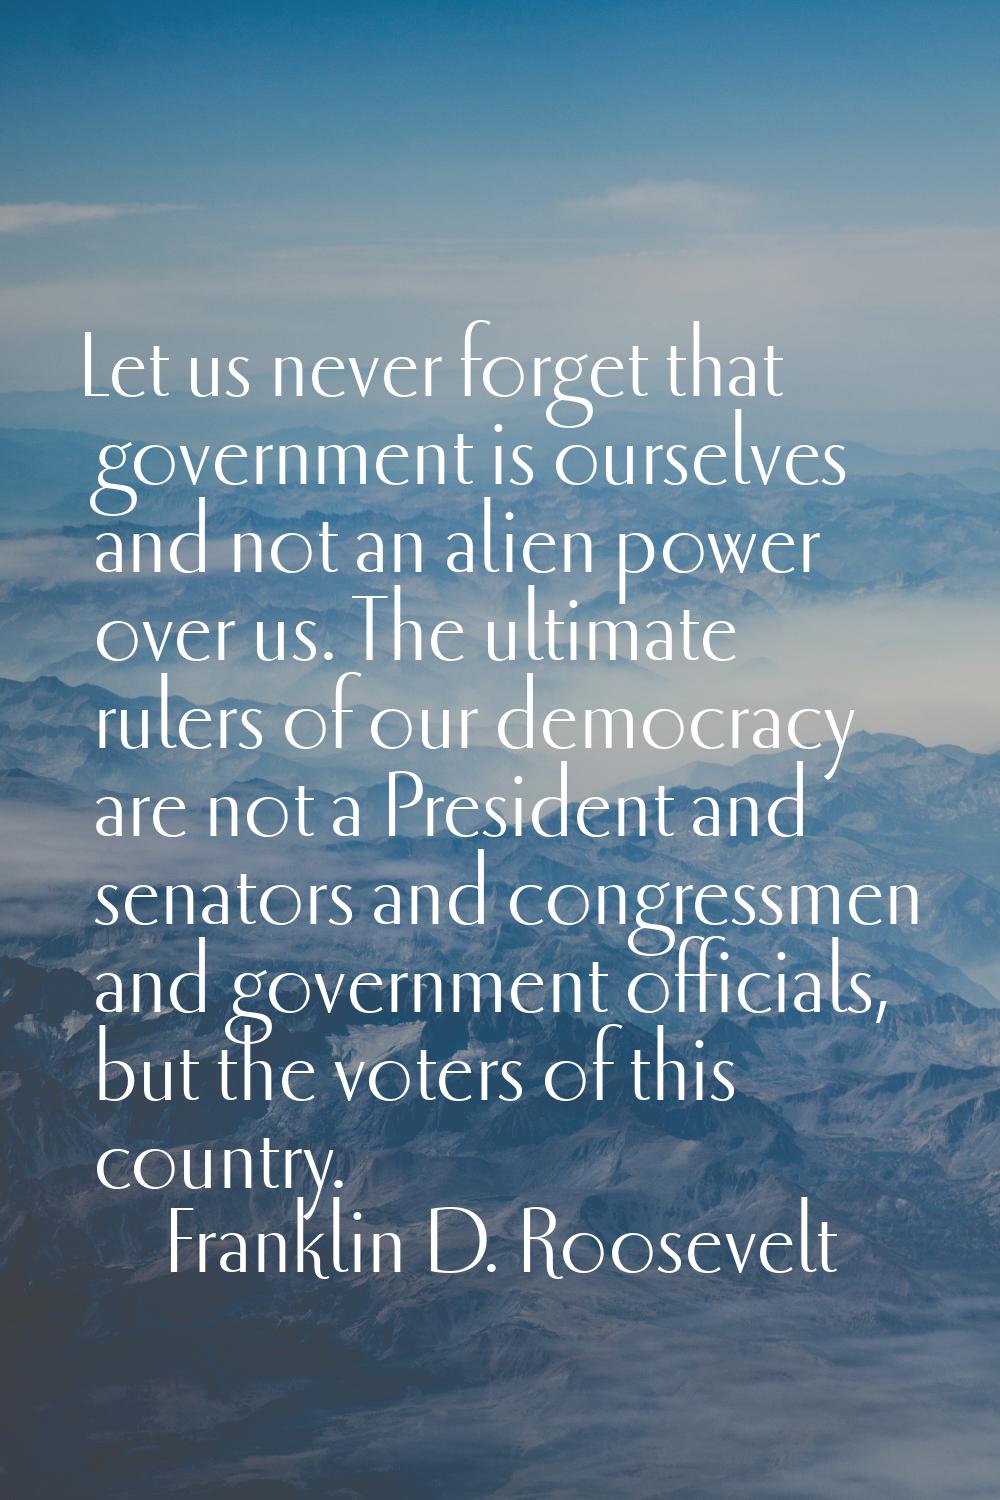 Let us never forget that government is ourselves and not an alien power over us. The ultimate ruler